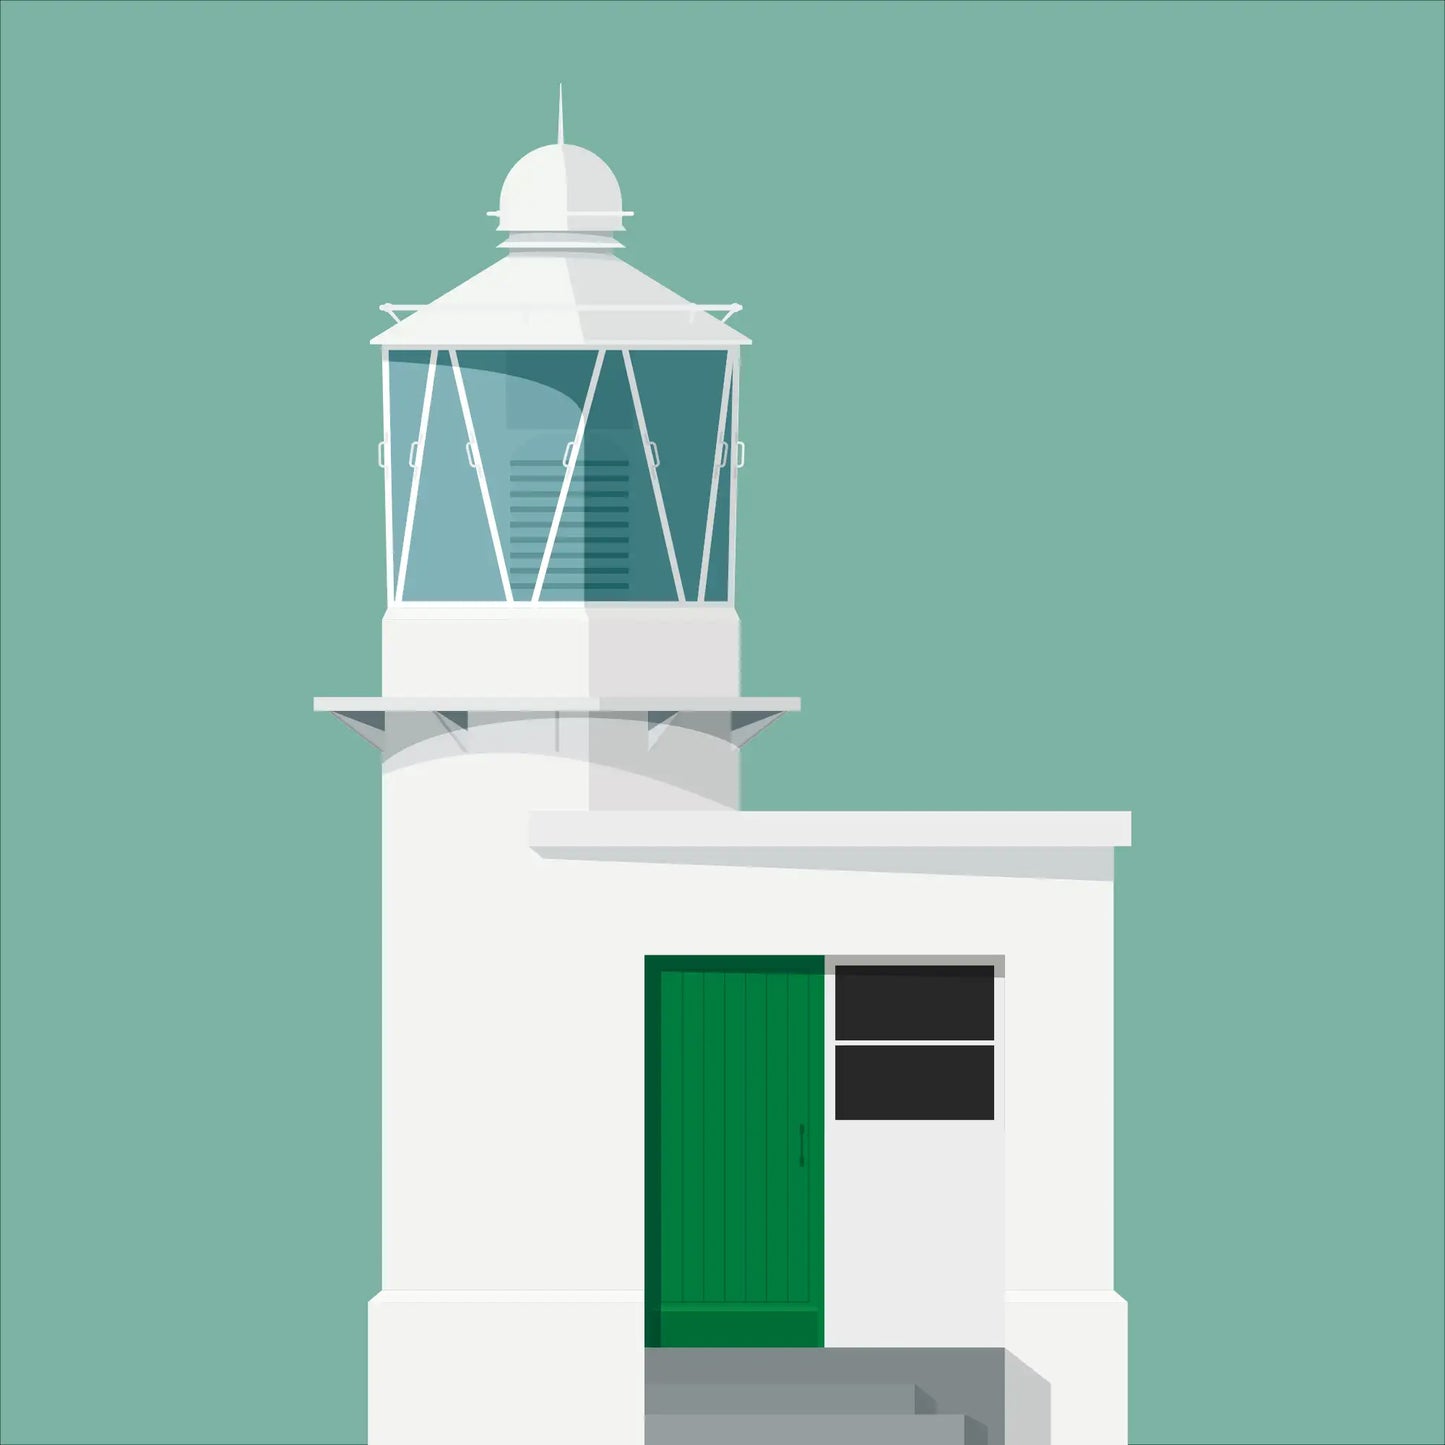 Contemporary graphic illustration of Achillbeg lighthouse on a white background inside light blue square.